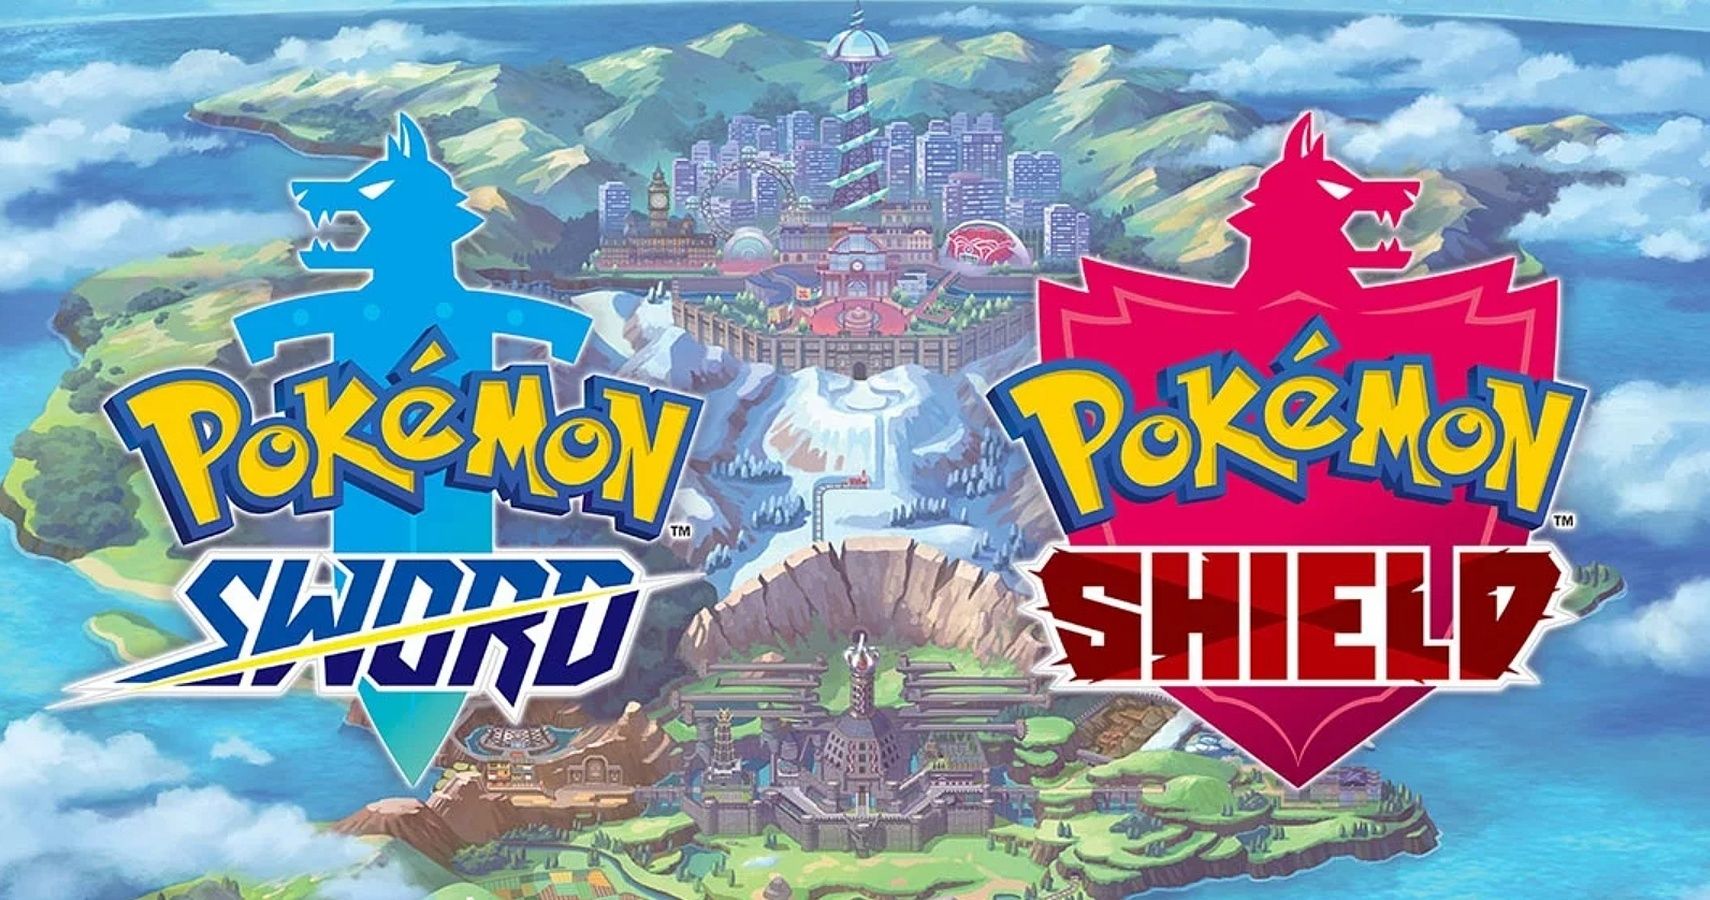 Pokemon Sword and Shield Map and Logo